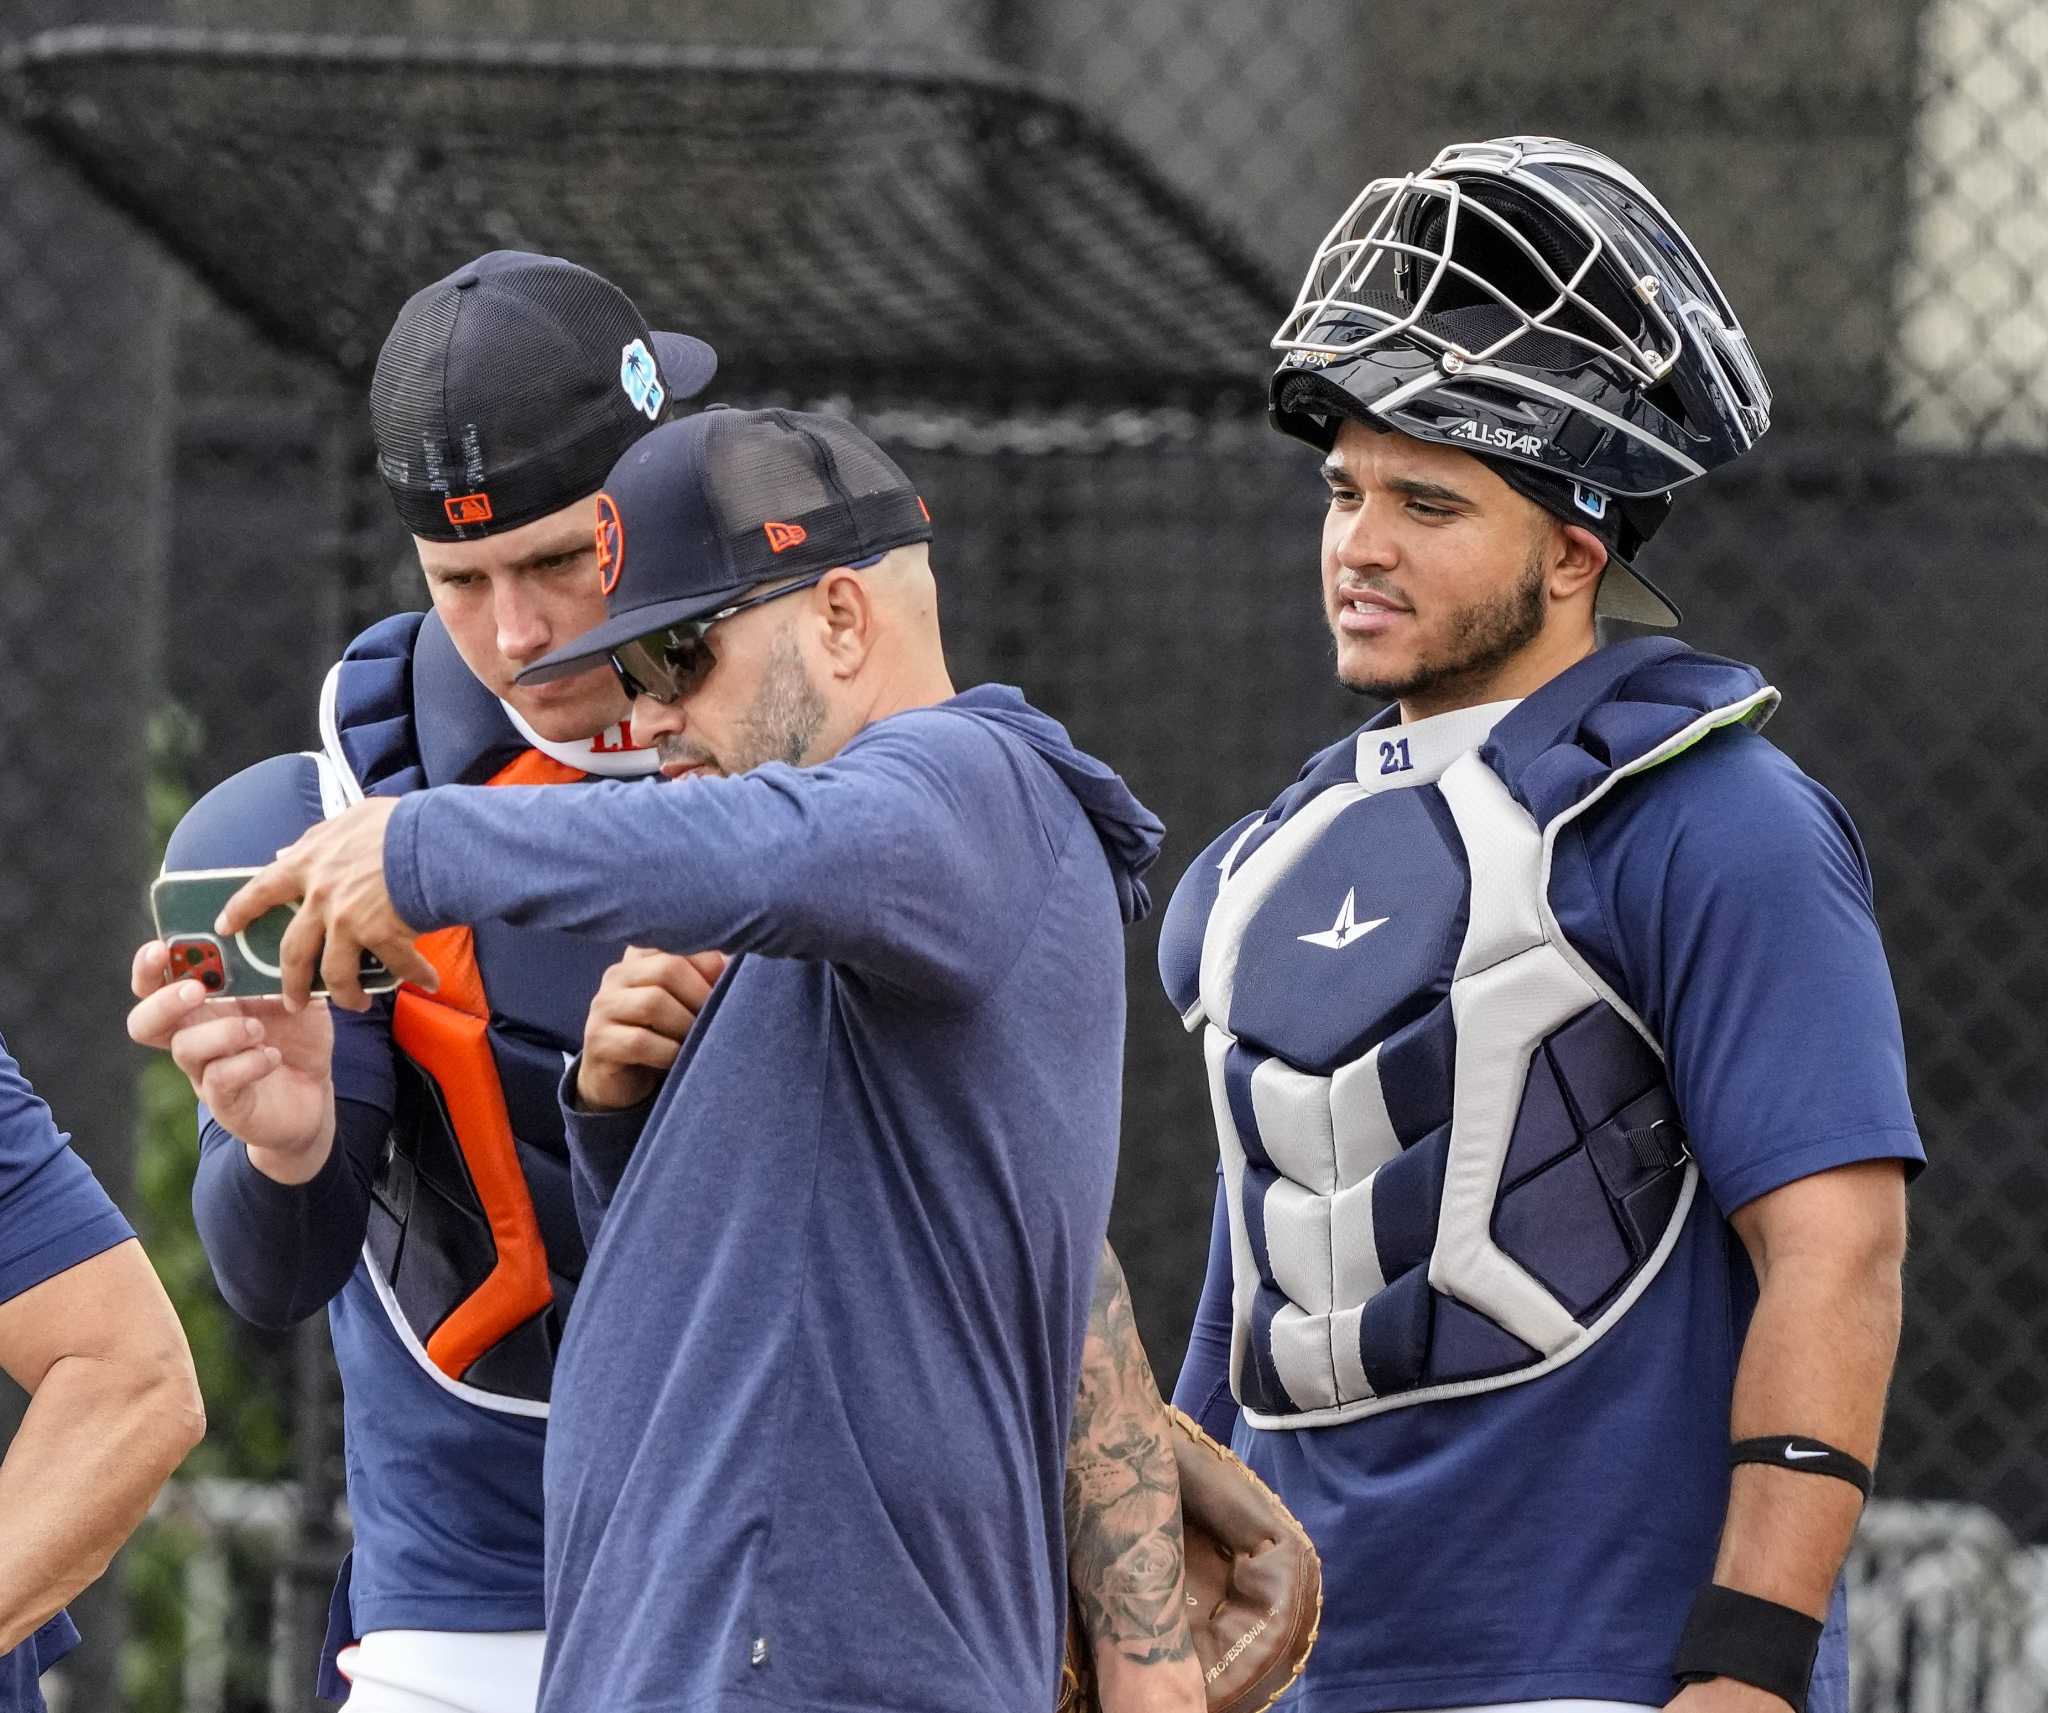 Houston Astros: Yainer Diaz awaits playing time as 3rd catcher